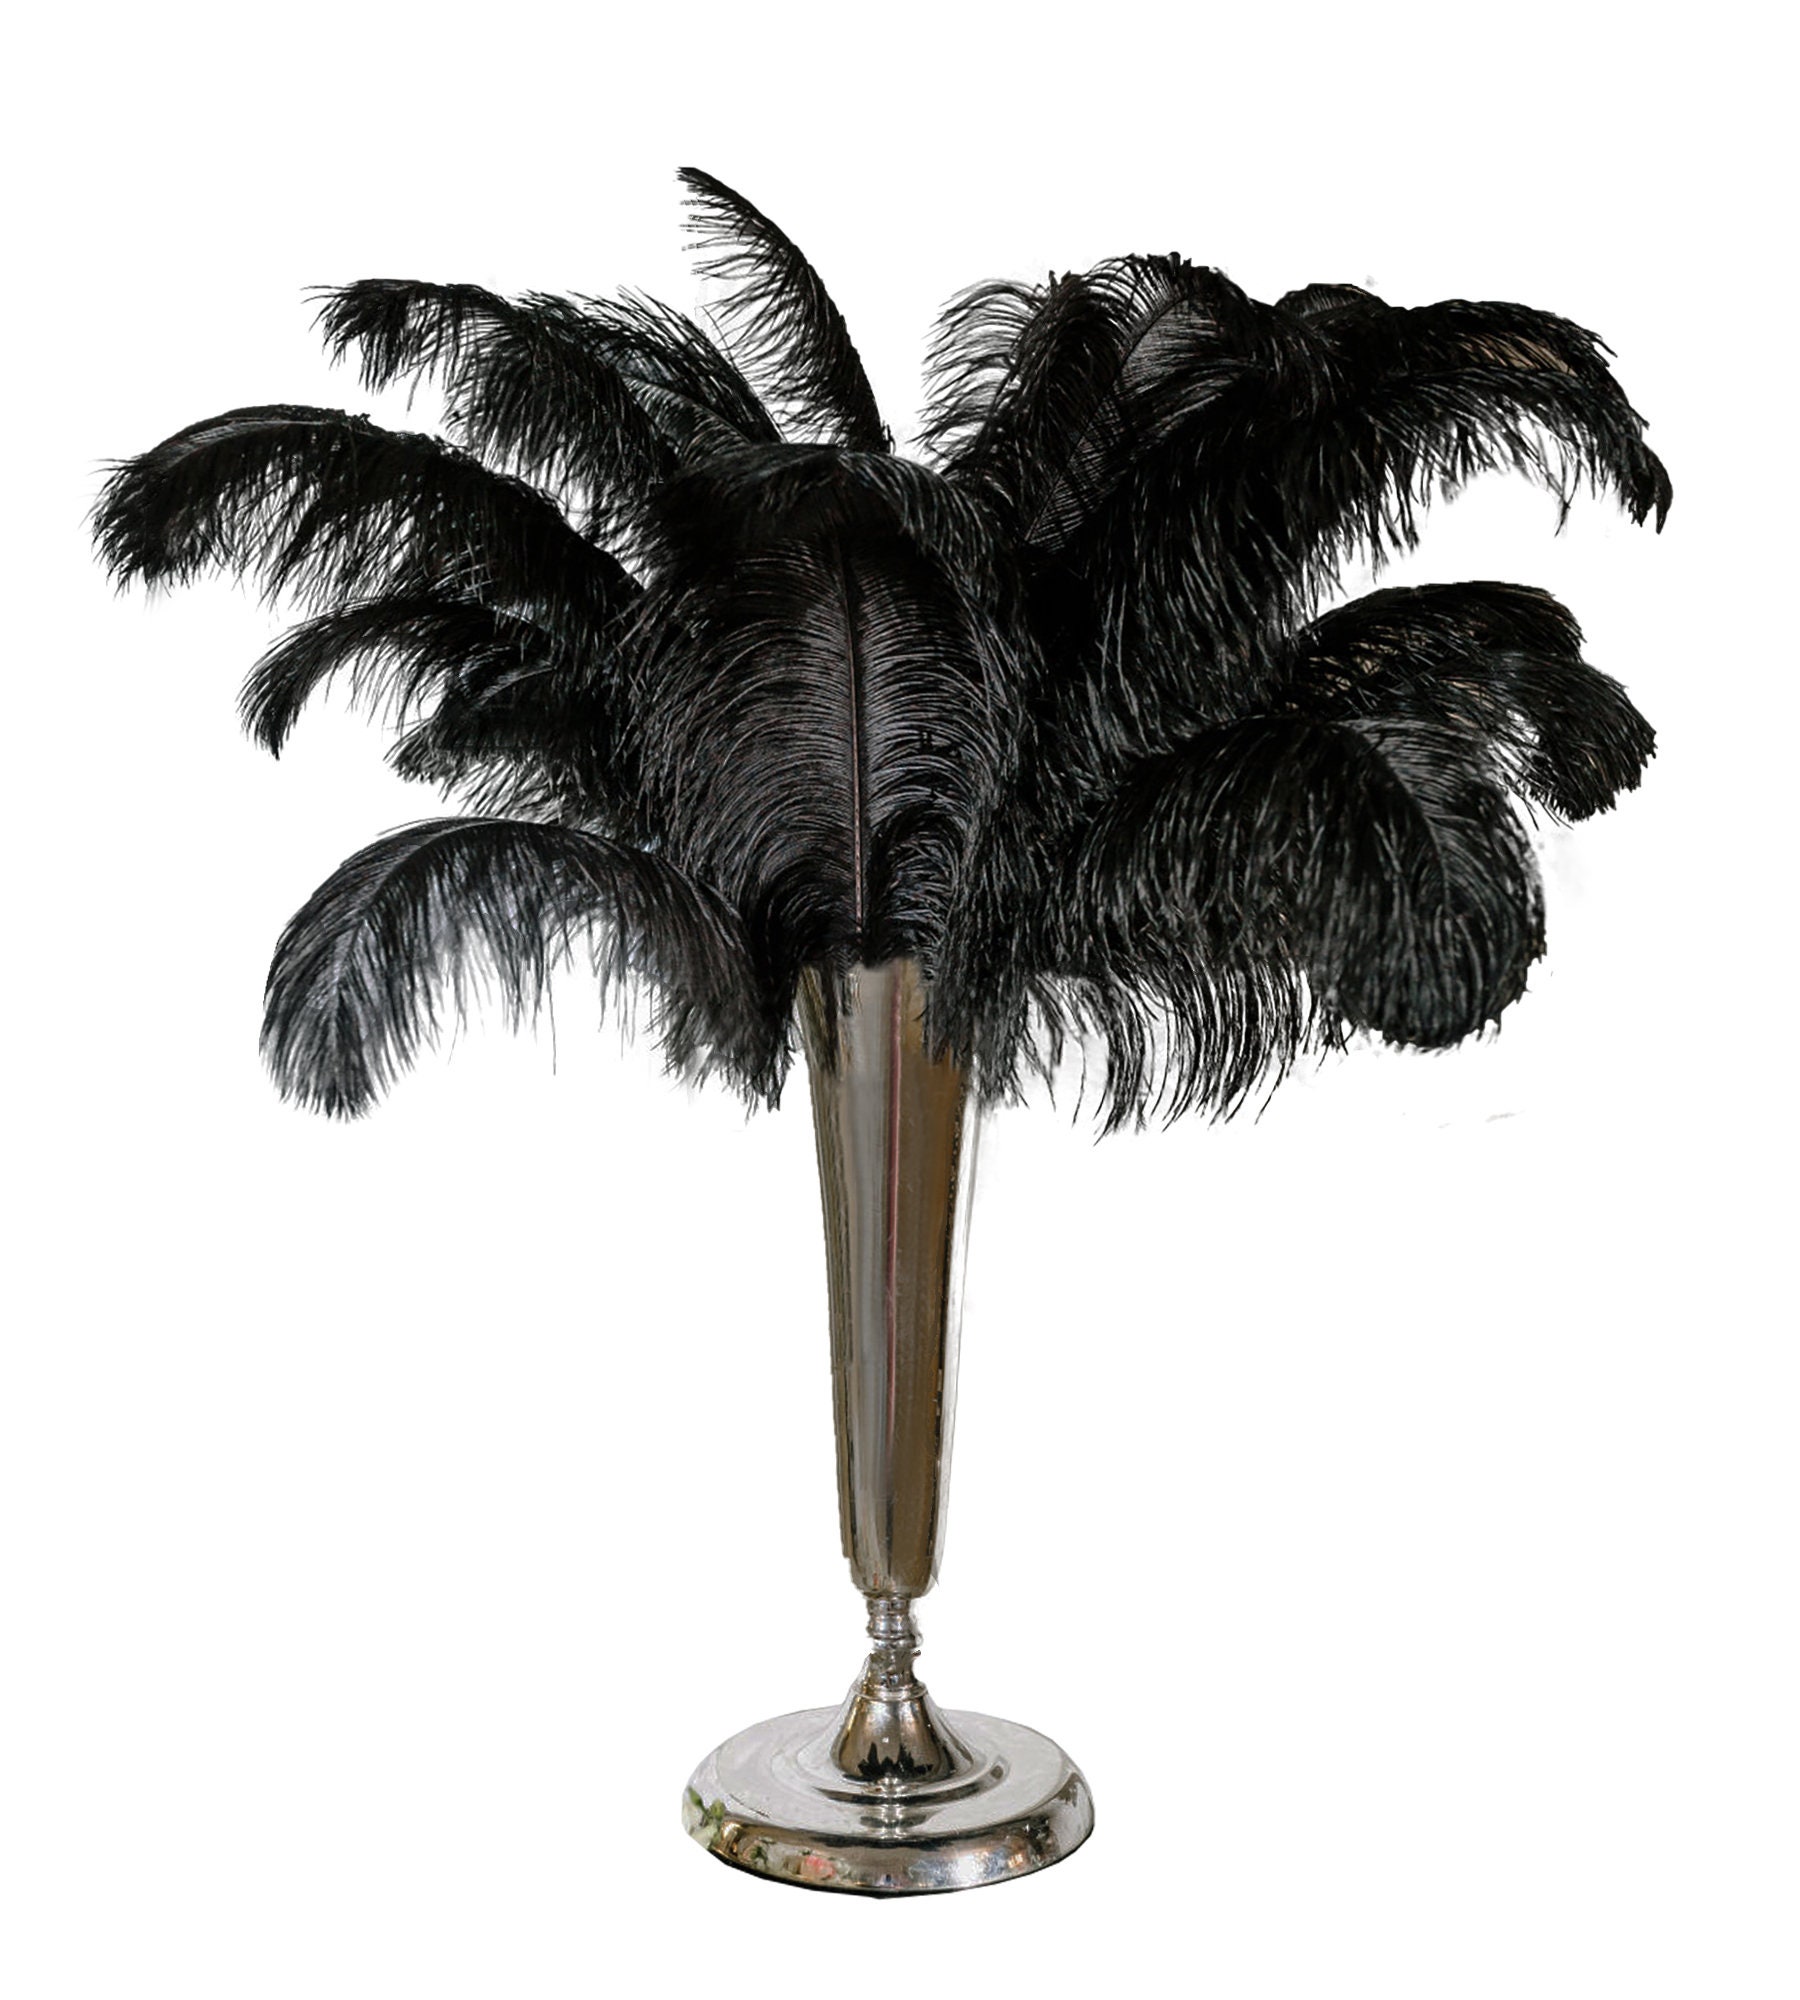 7-9 Inch Black Ostrich Feathers. 5 Black Feathers. Black Bird Feathers.  Center Piece Feathers. Black Wedding Feathers. Black Pen Feathers. 